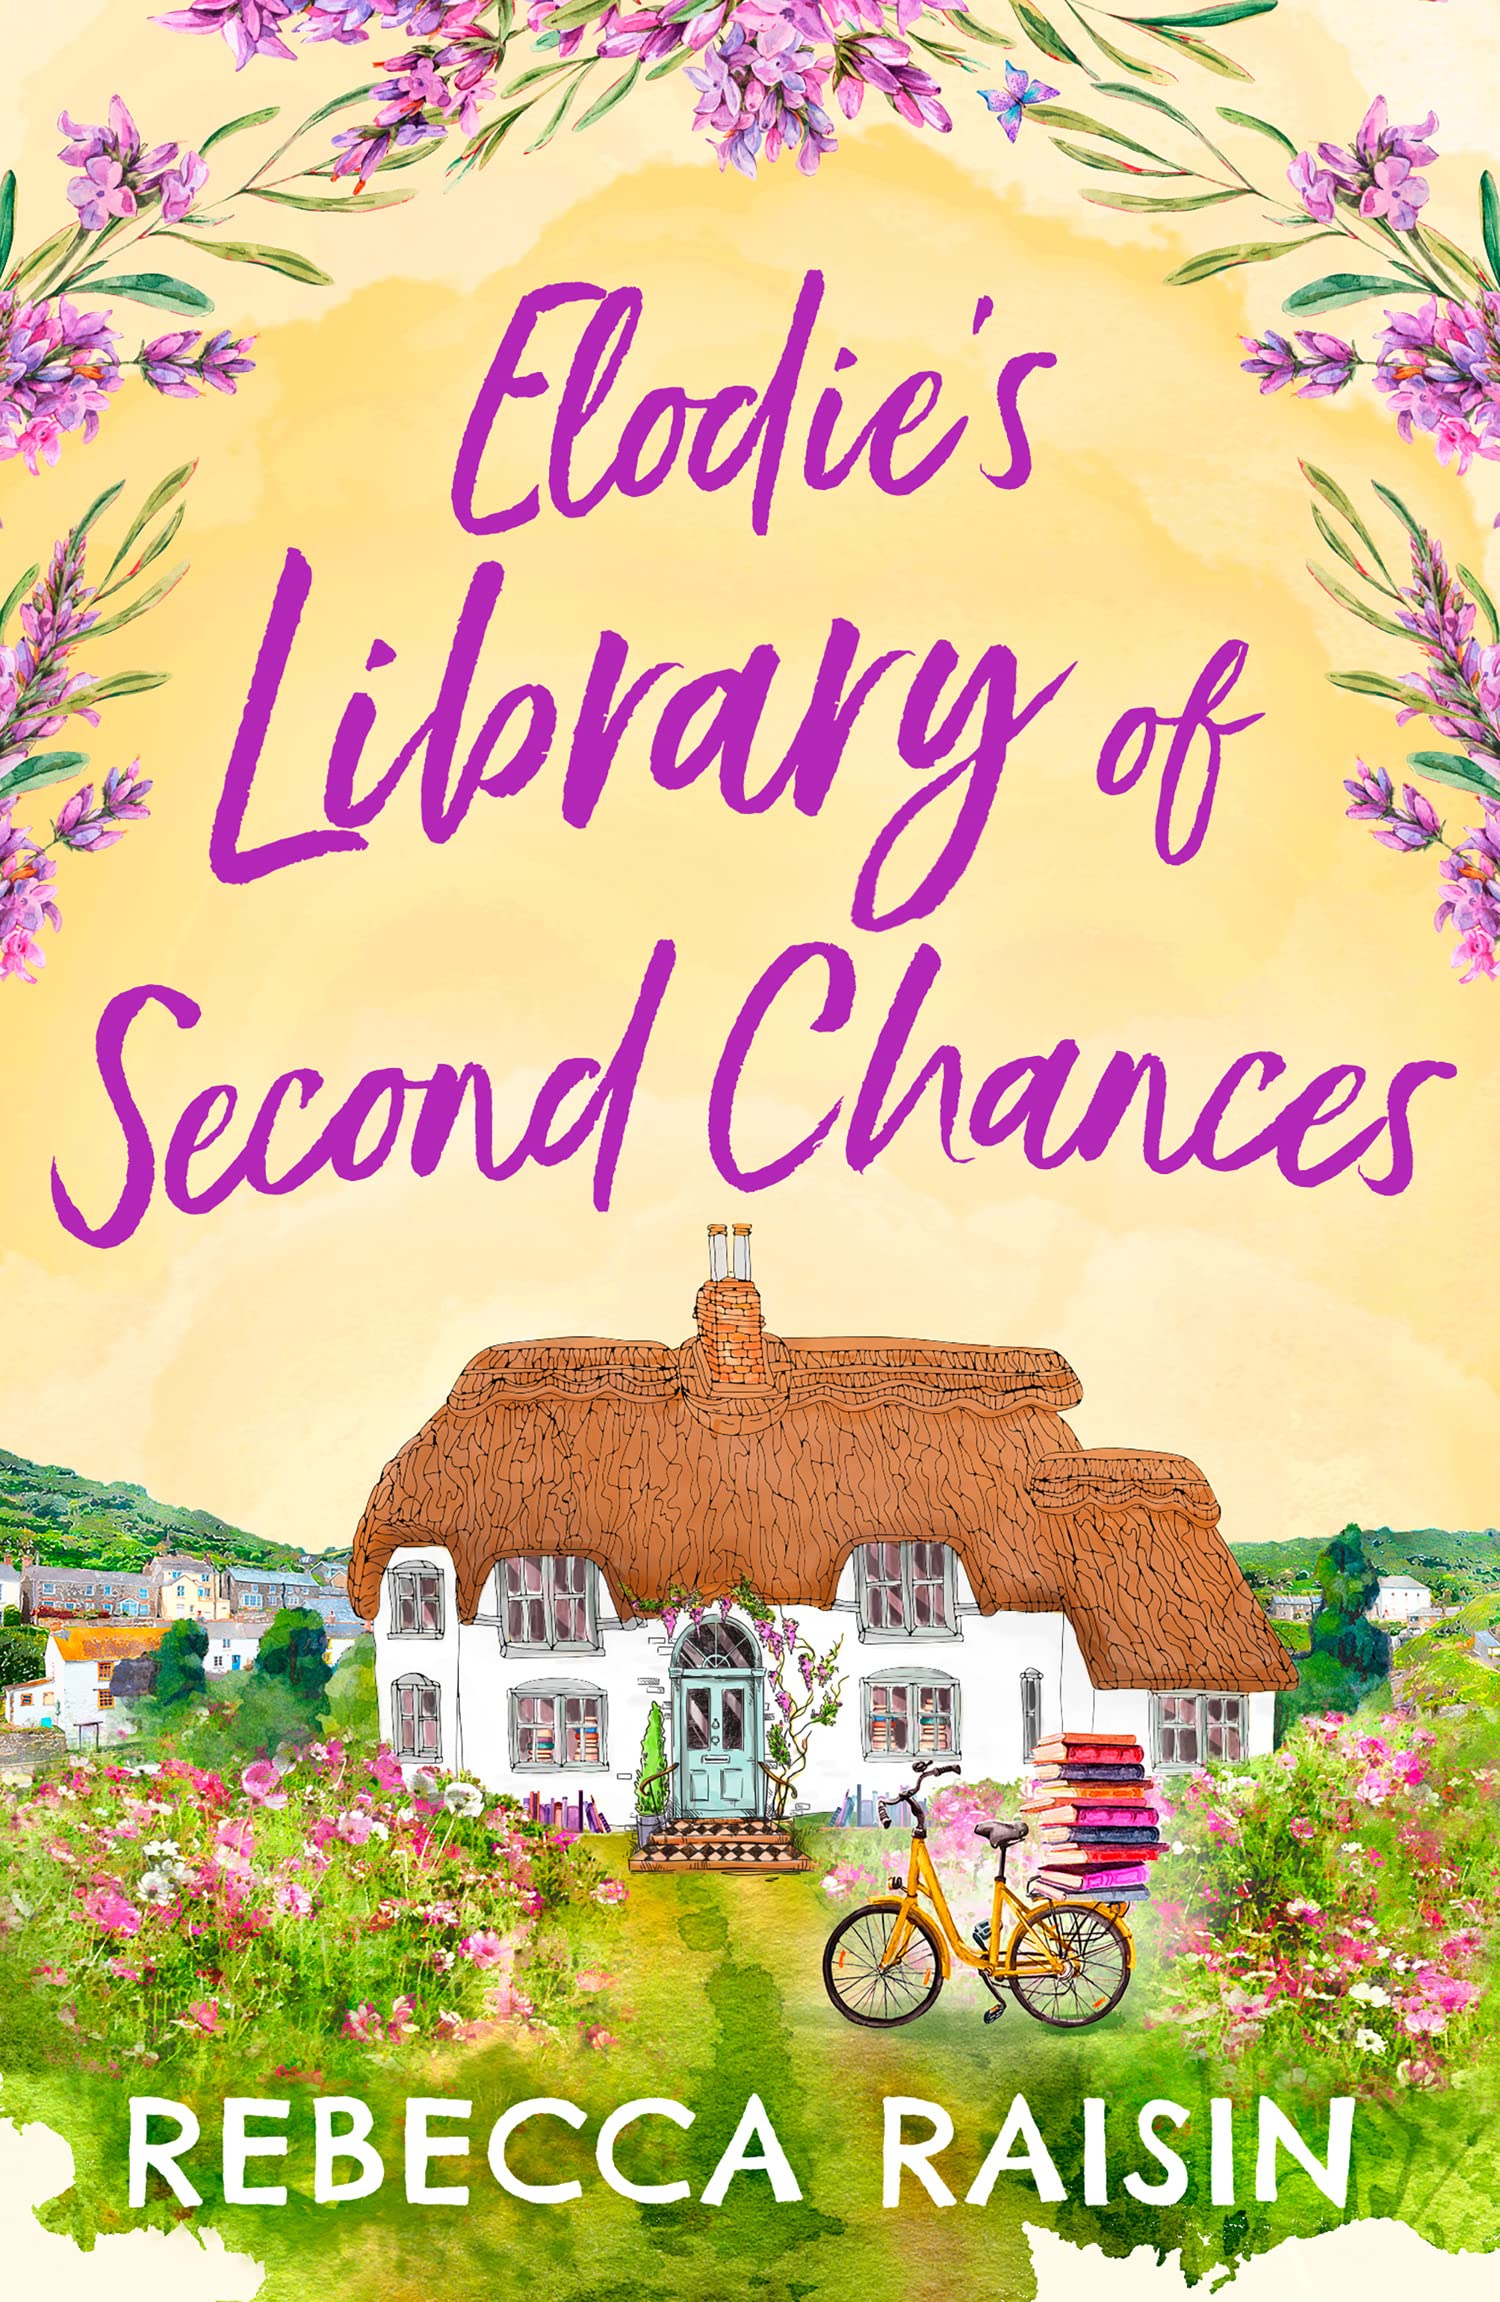 BLOG TOUR – Elodie’s Library of Second Chances by Rebecca Raisin